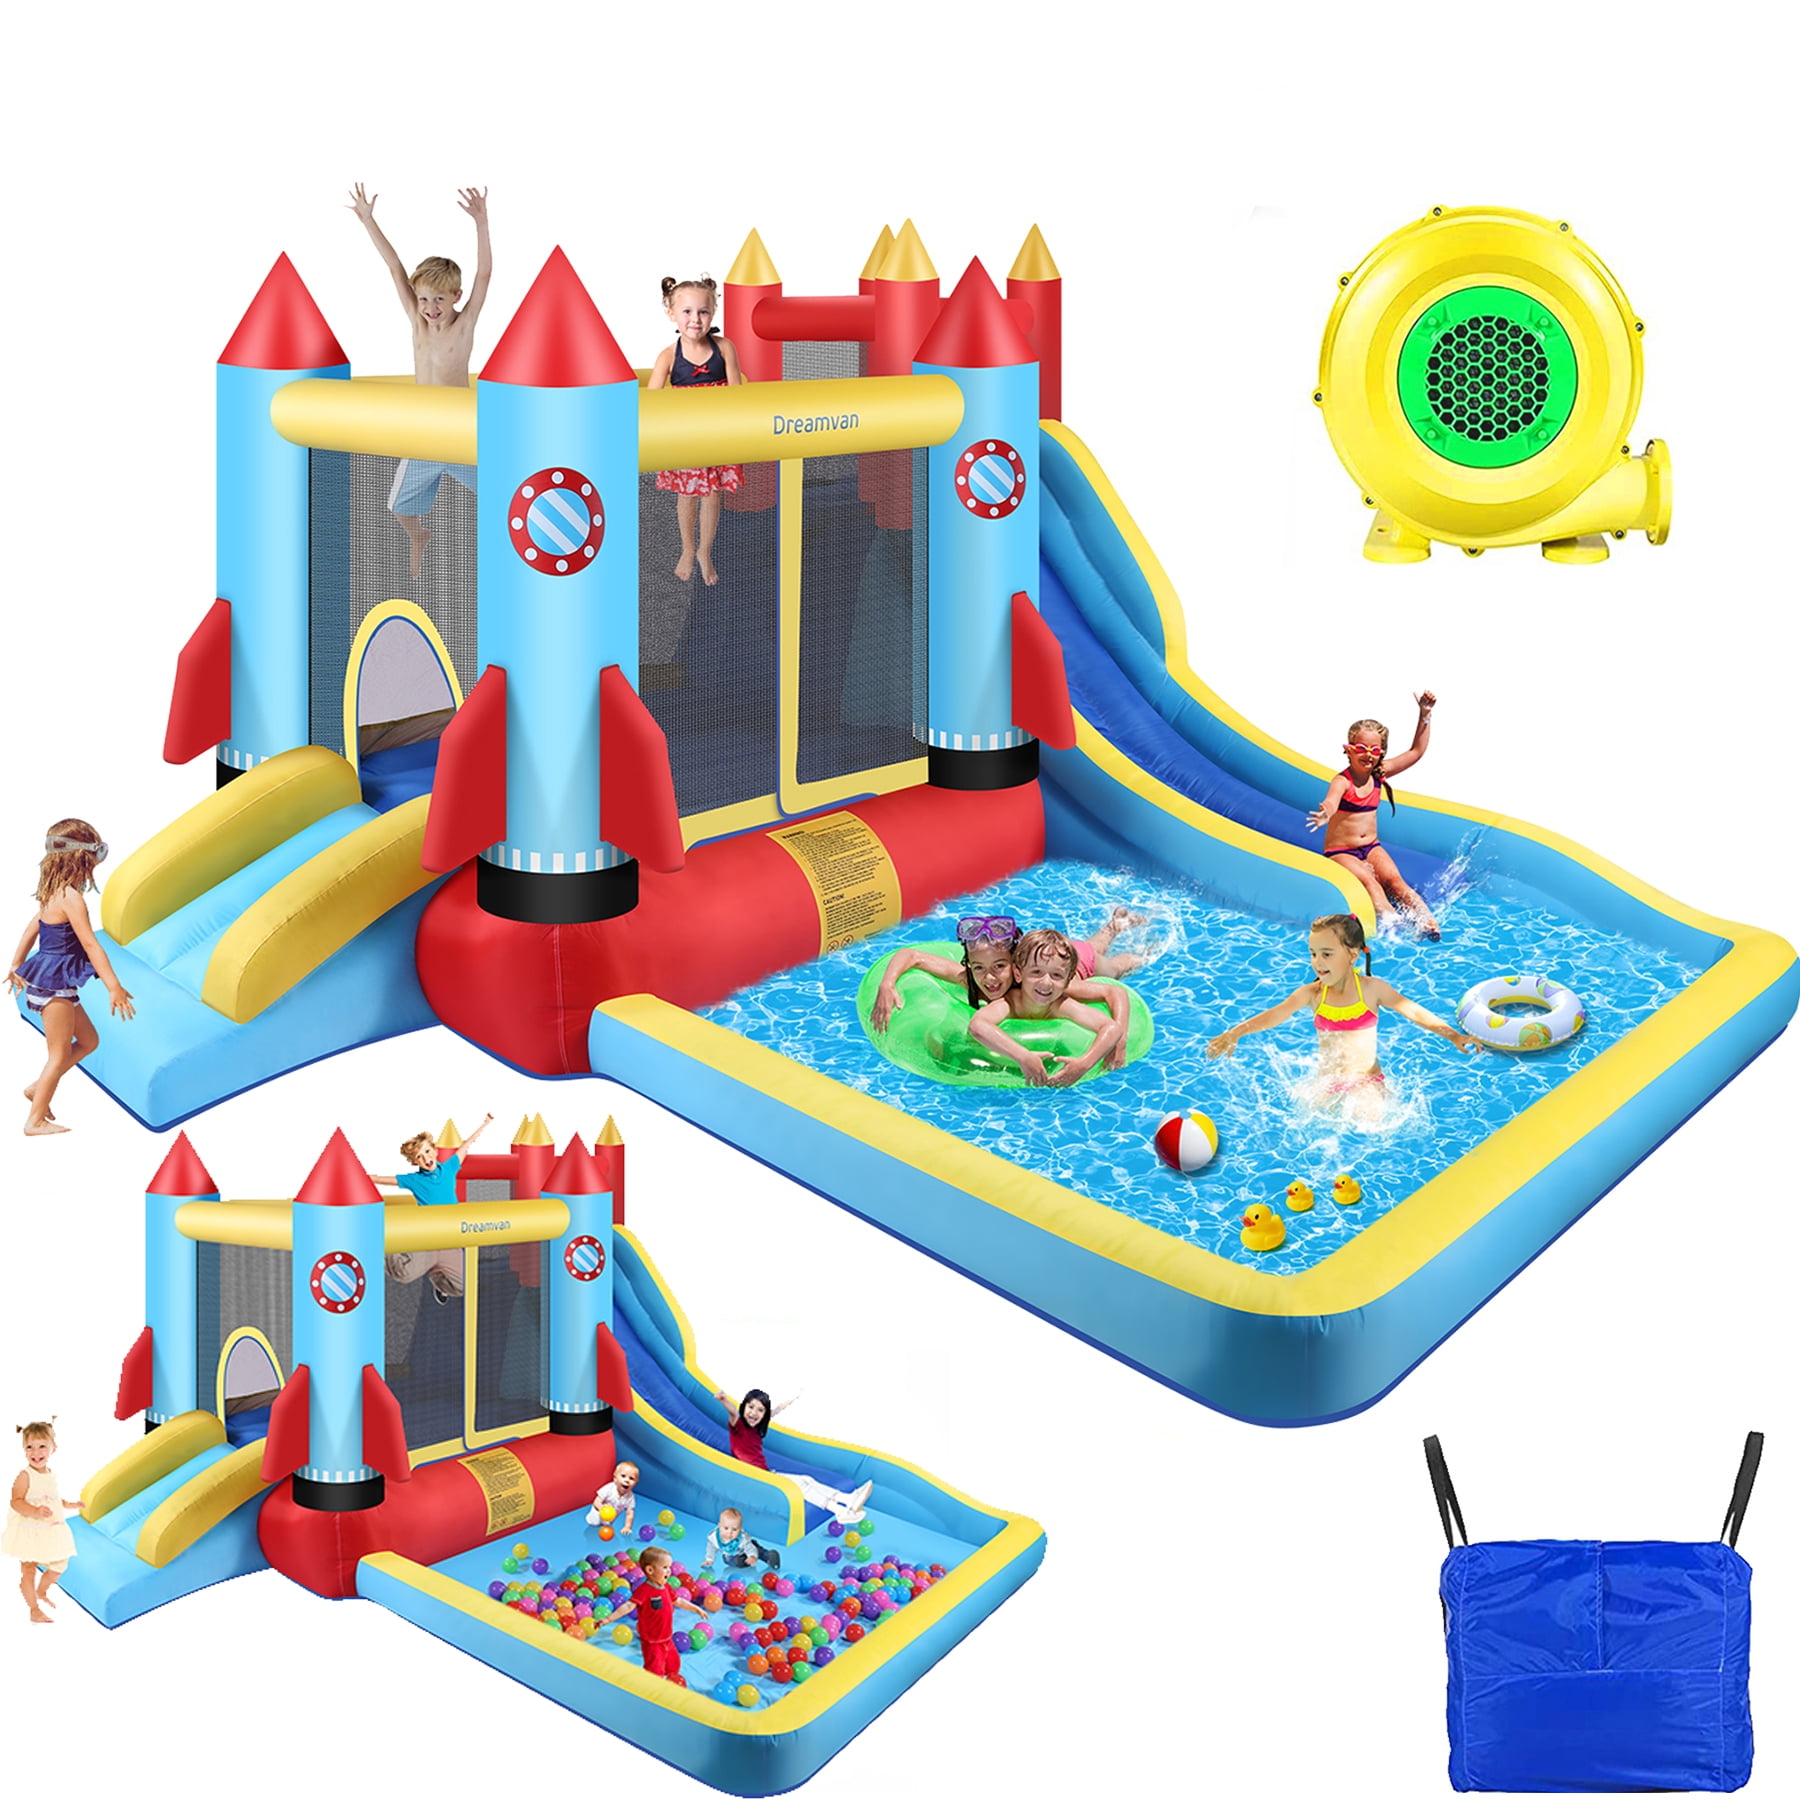 Pool　with　Qhomic　Pit/Large　Bouncy　Blower　Kids　Inflatable　Outdoor/Indoor　House,　146''x　Houses　Climbing　82''　132''　Slide　x　and　Teen,　Double　Bounce　Adult　for　3-12　PVC,　Wall　Ball　Tween,　Child,　Toddler,